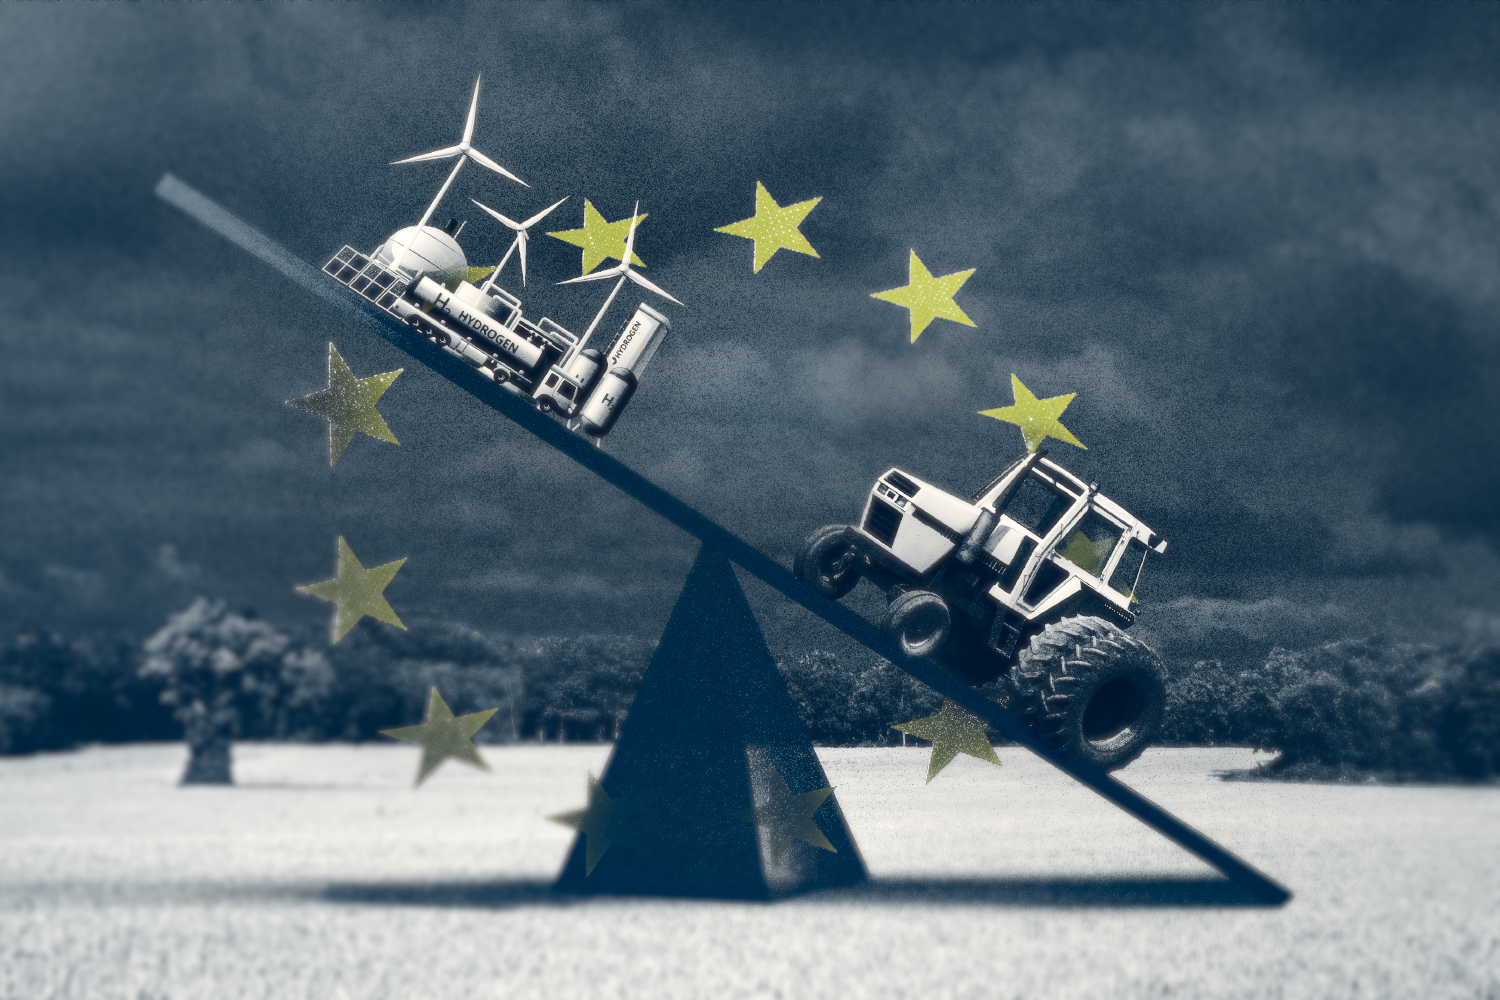 A see saw with a wind-powered hydrogen plant on one side and a tractor on the other, with the stars of the European Union behind it.